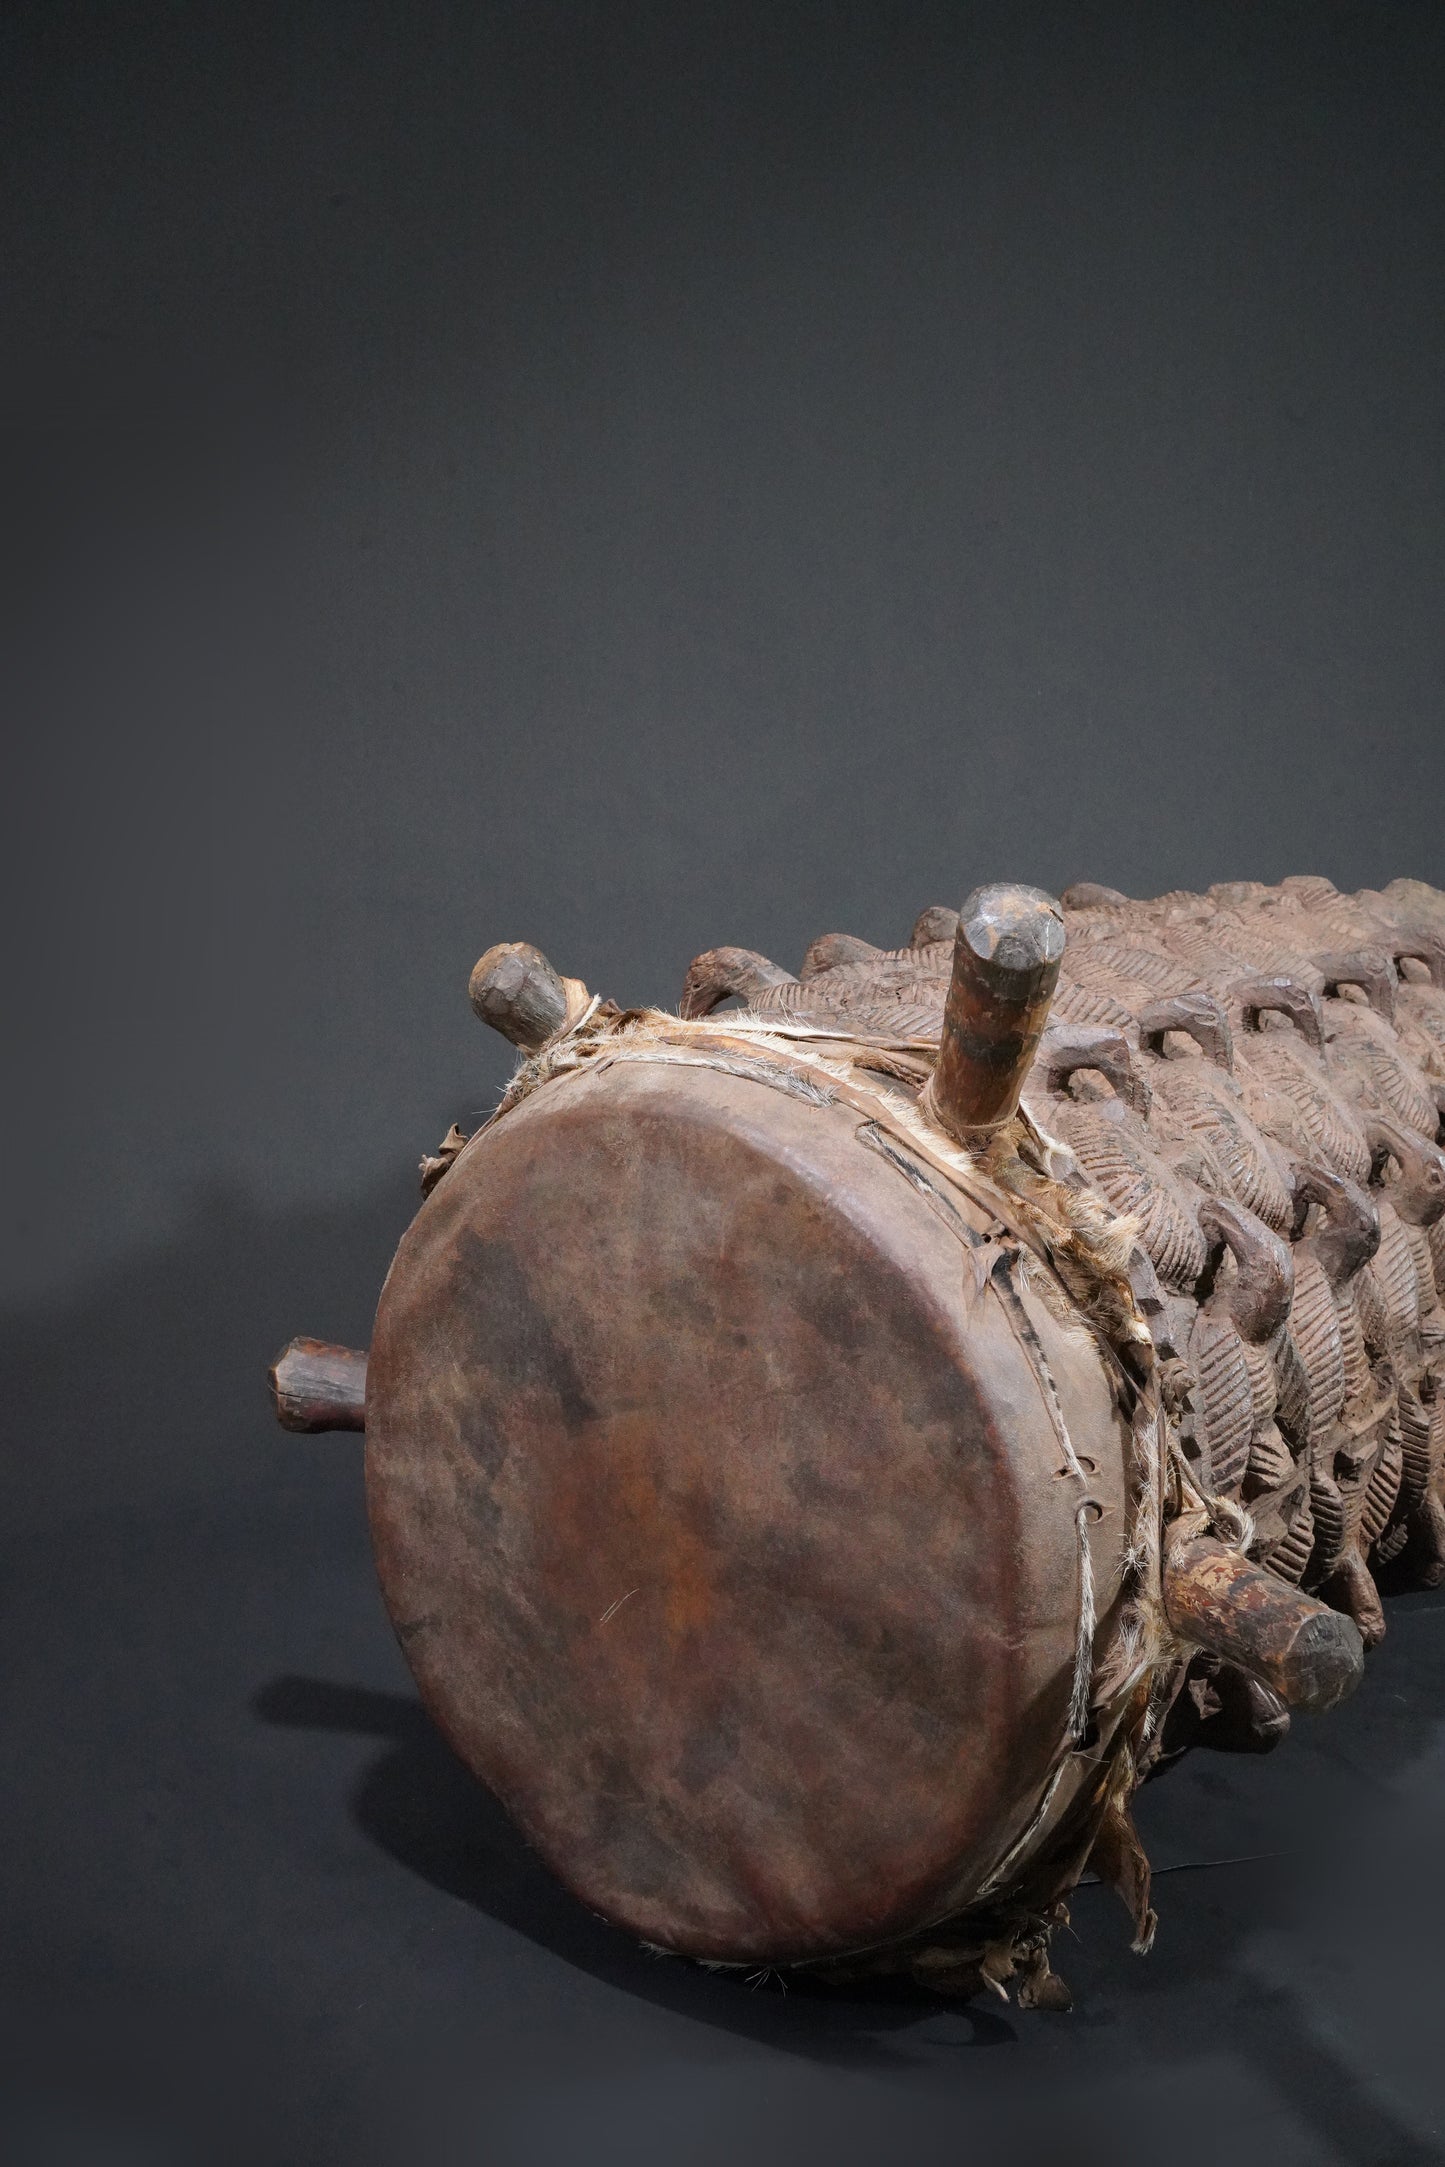 A drum of Olowe of Ise